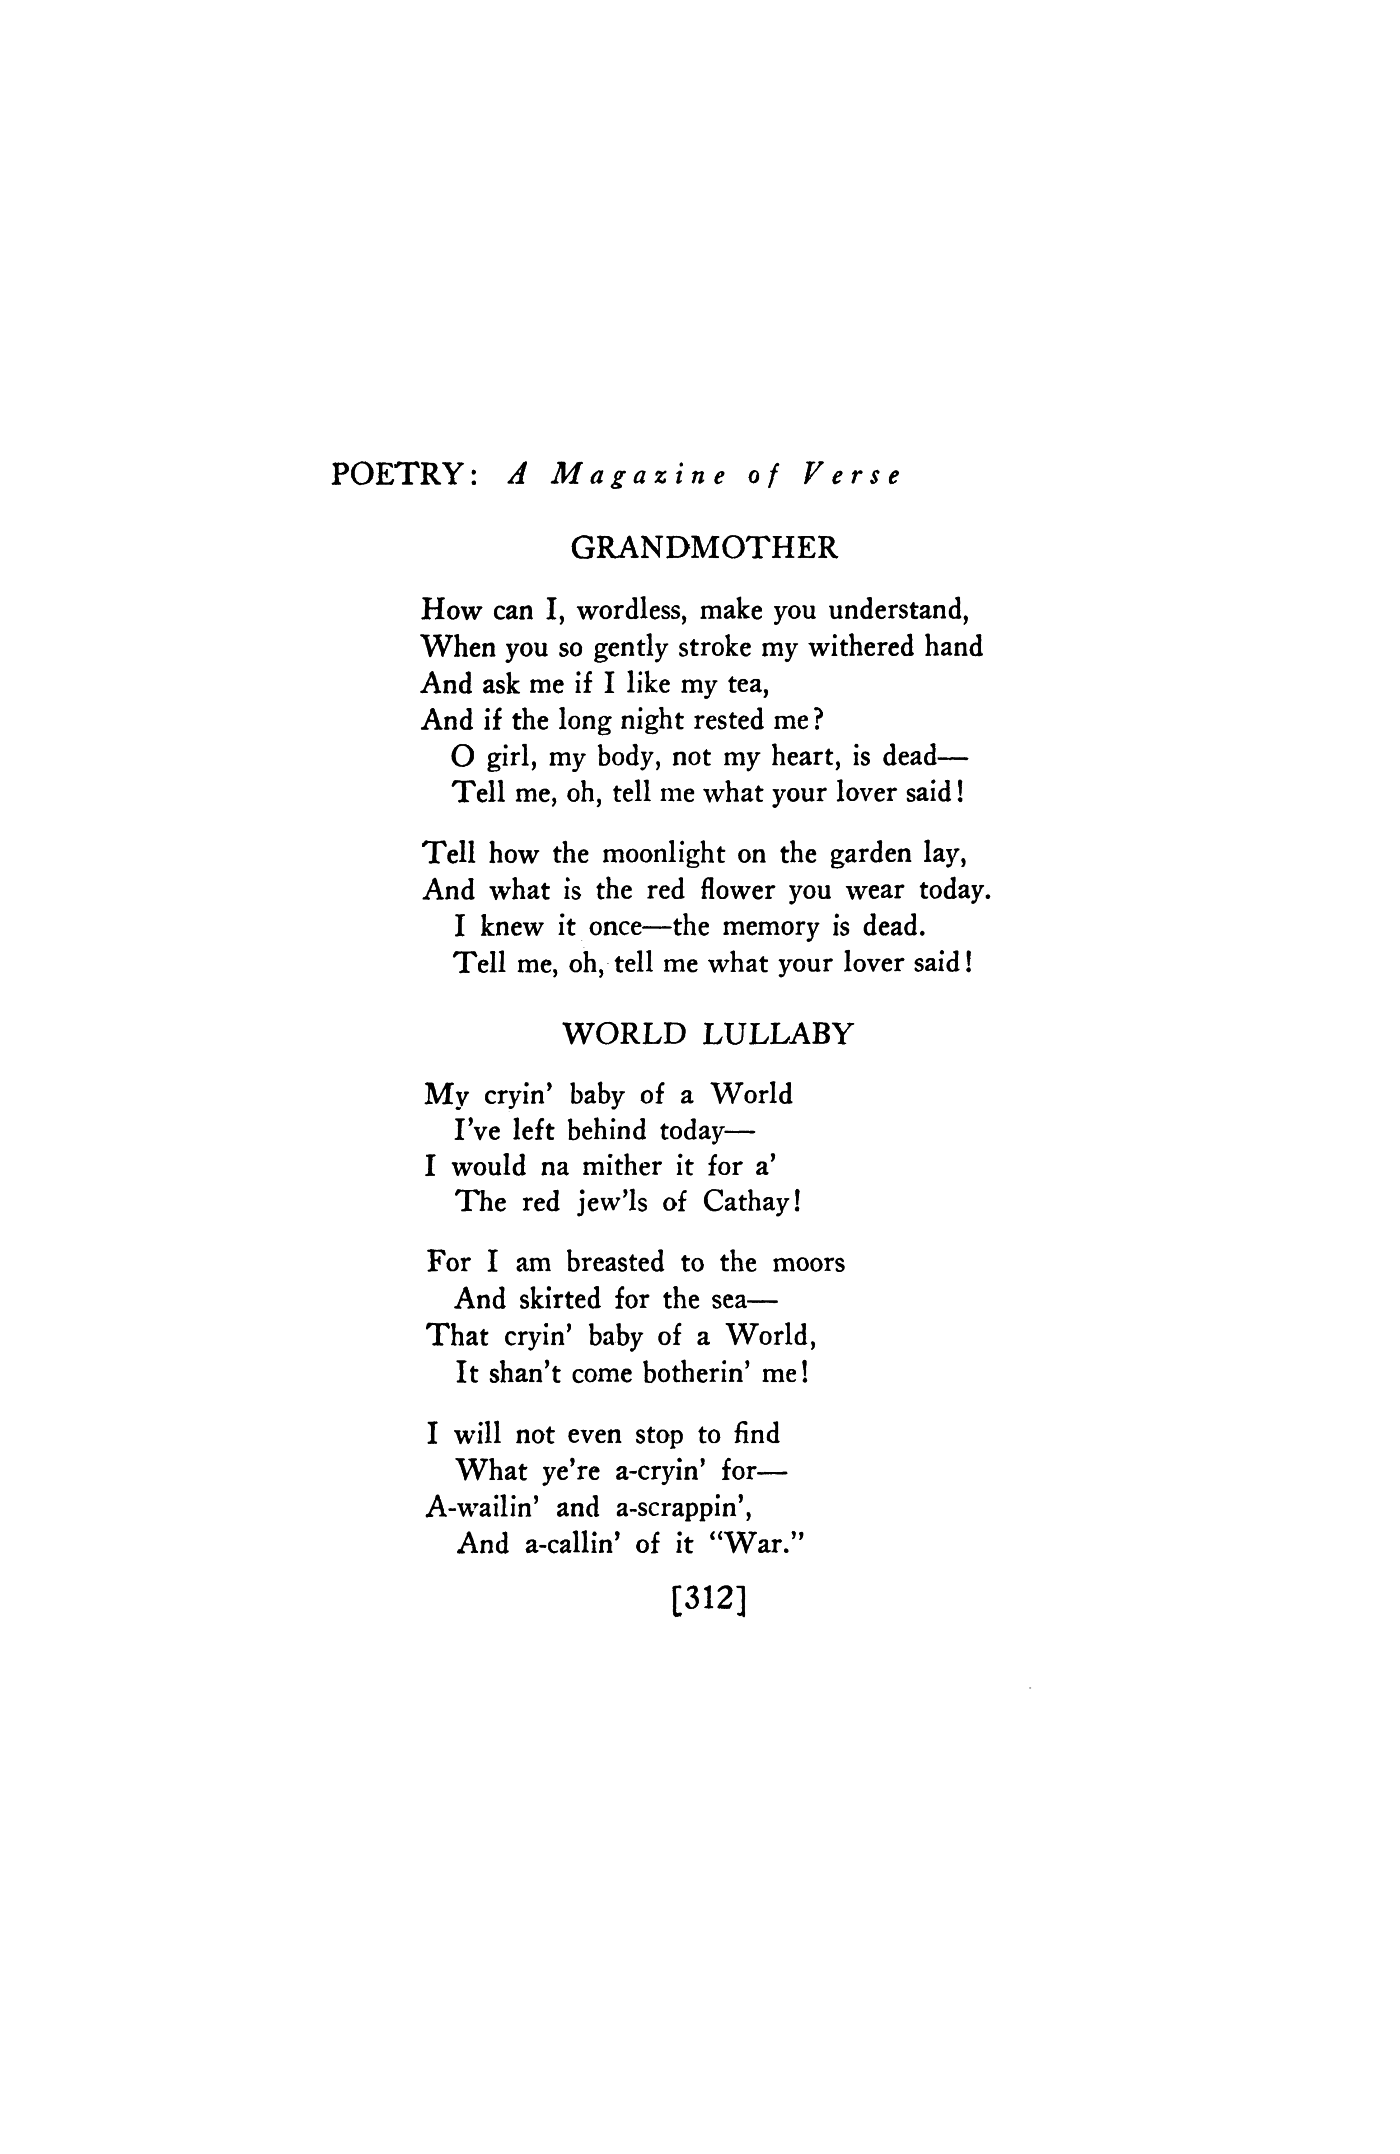 https://static.poetryfoundation.org/jstor/i20572016/pages/22.png